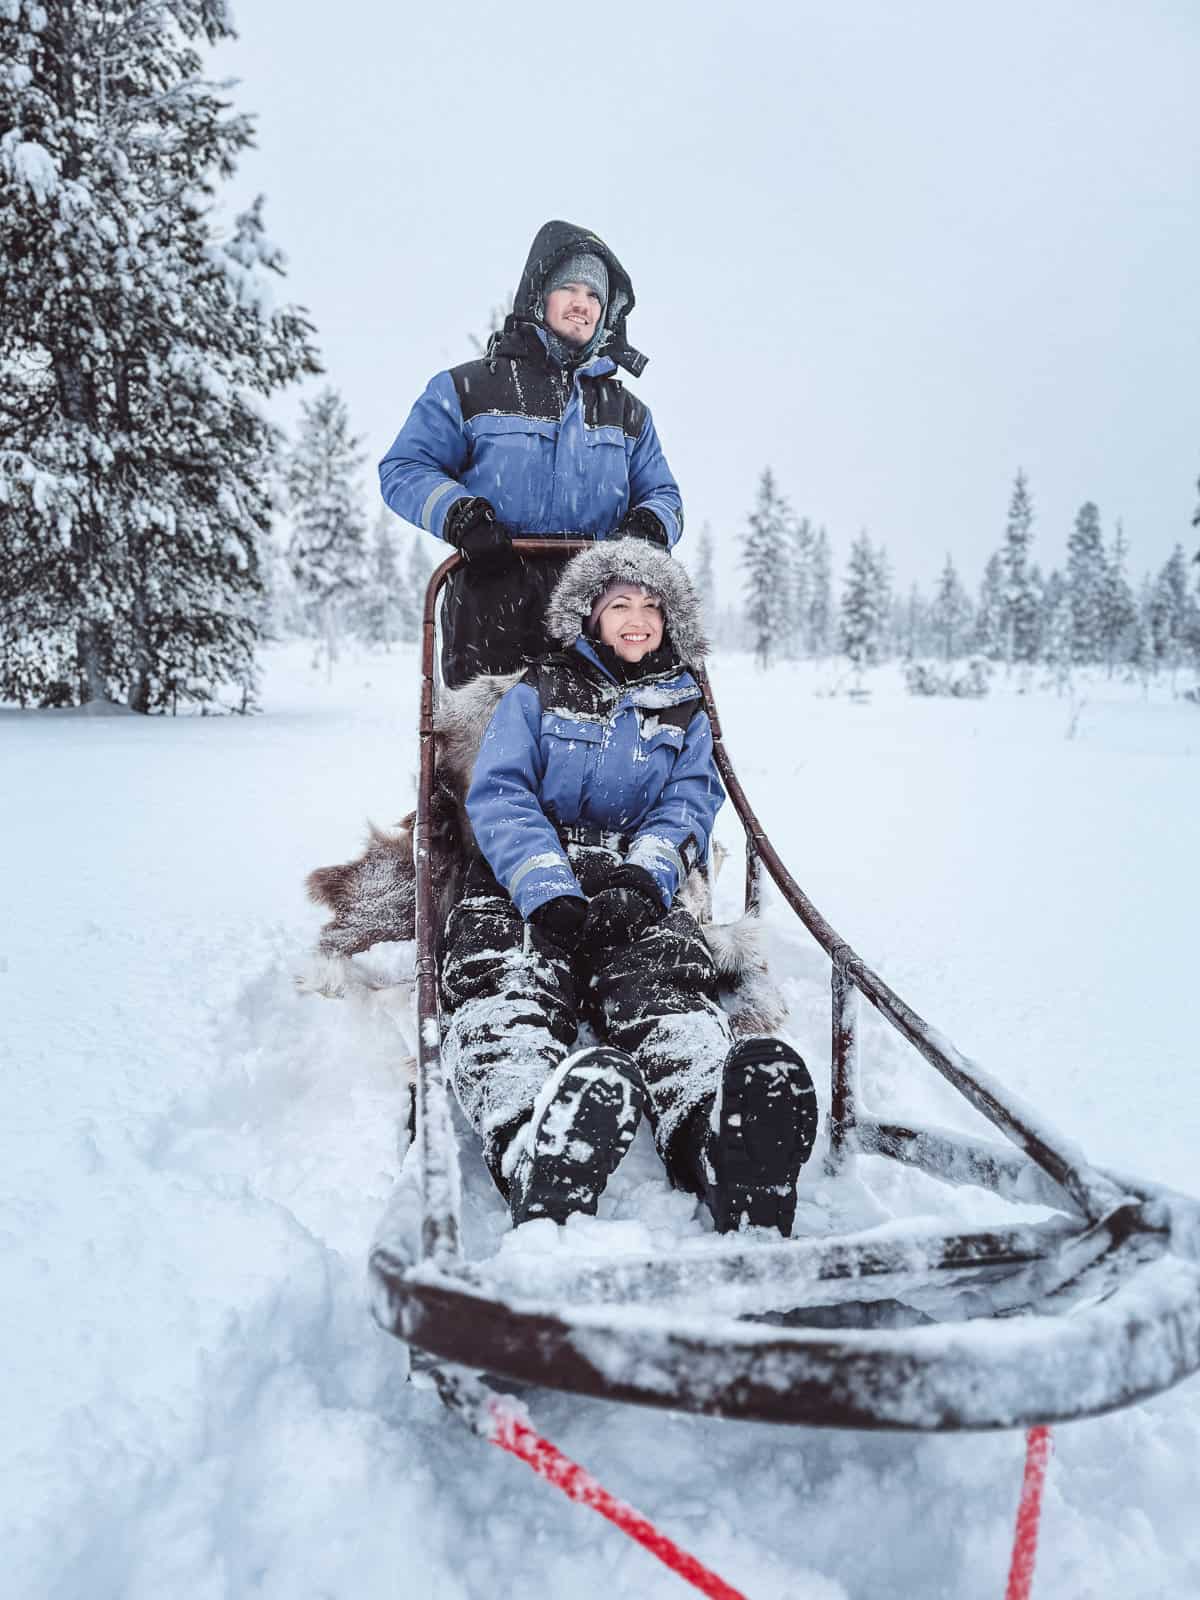 A joyful couple experiences dog sledding, with one steering the sled and the other seated comfortably, as they travel through a snowy winter wonderland.